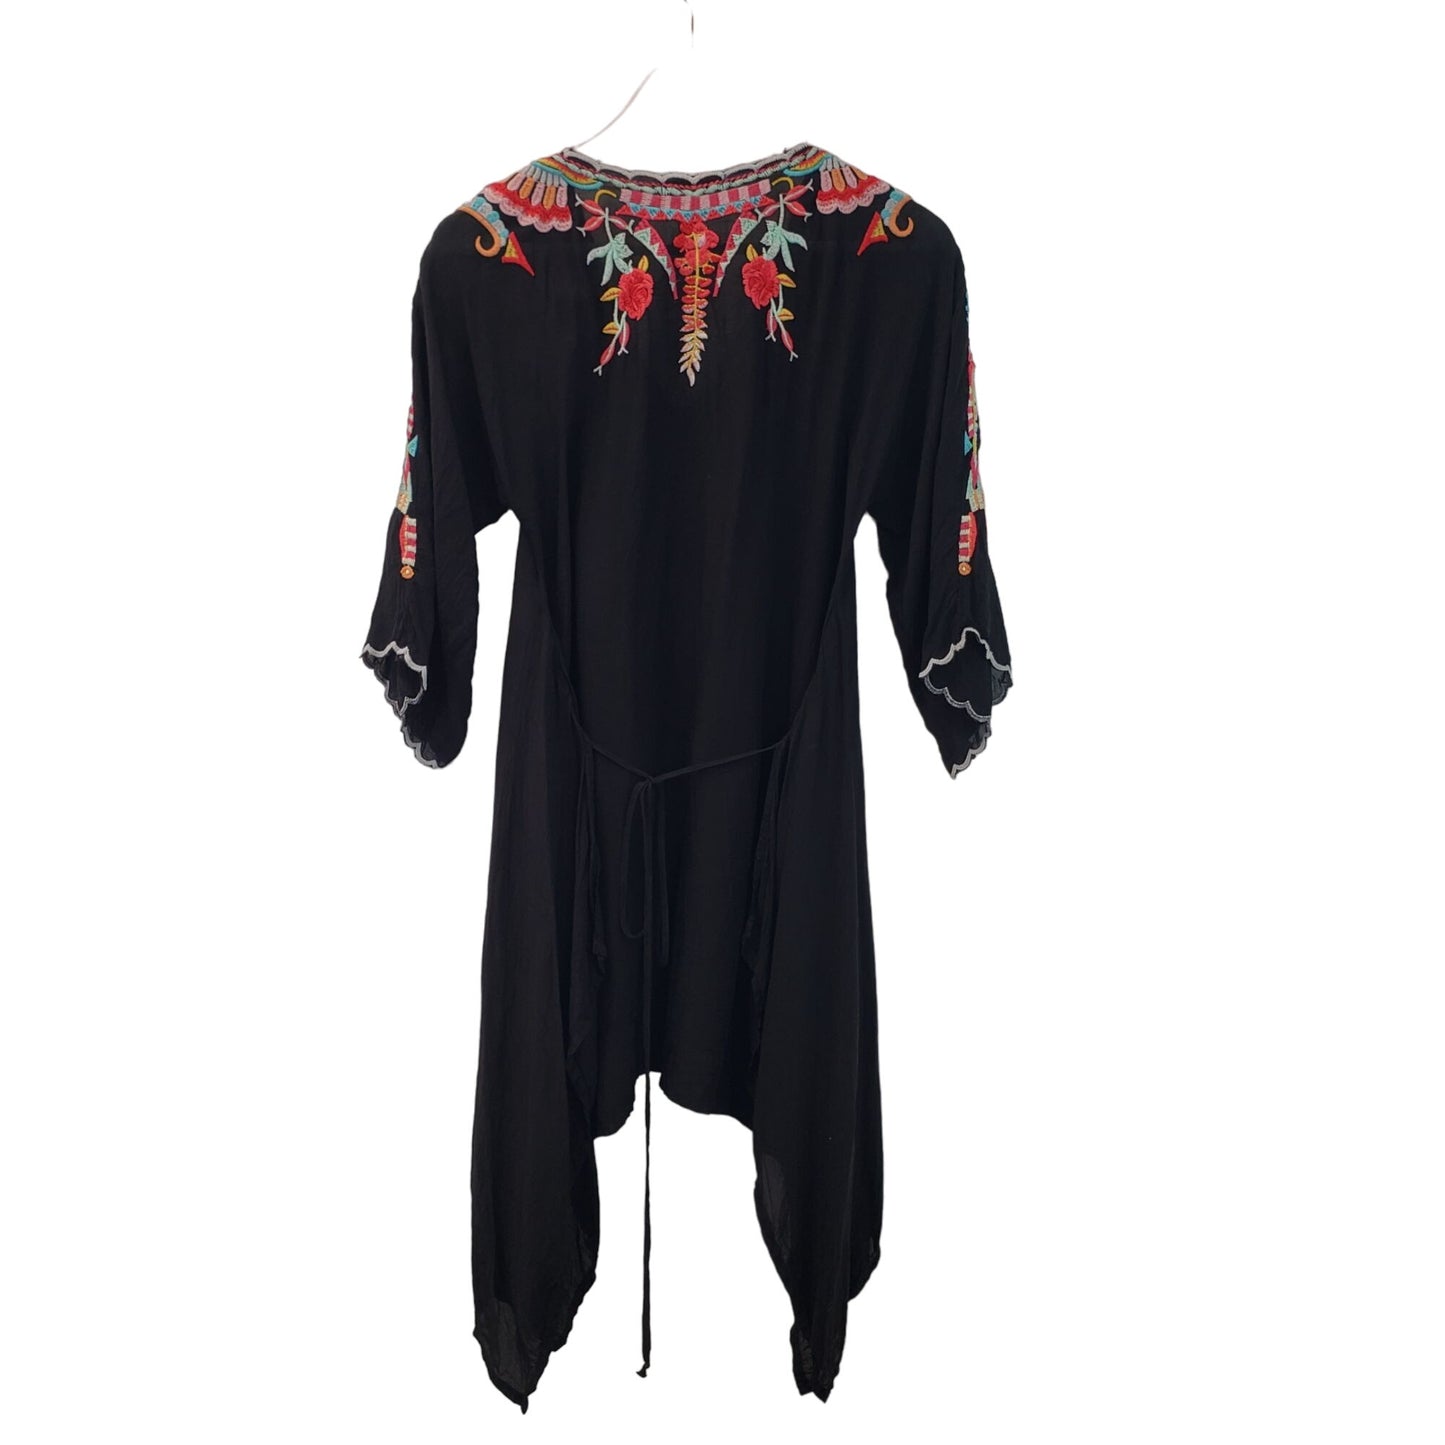 Johnny Was Floral Embroidered Tunic Split Hem Top Cover-up Size XS/S